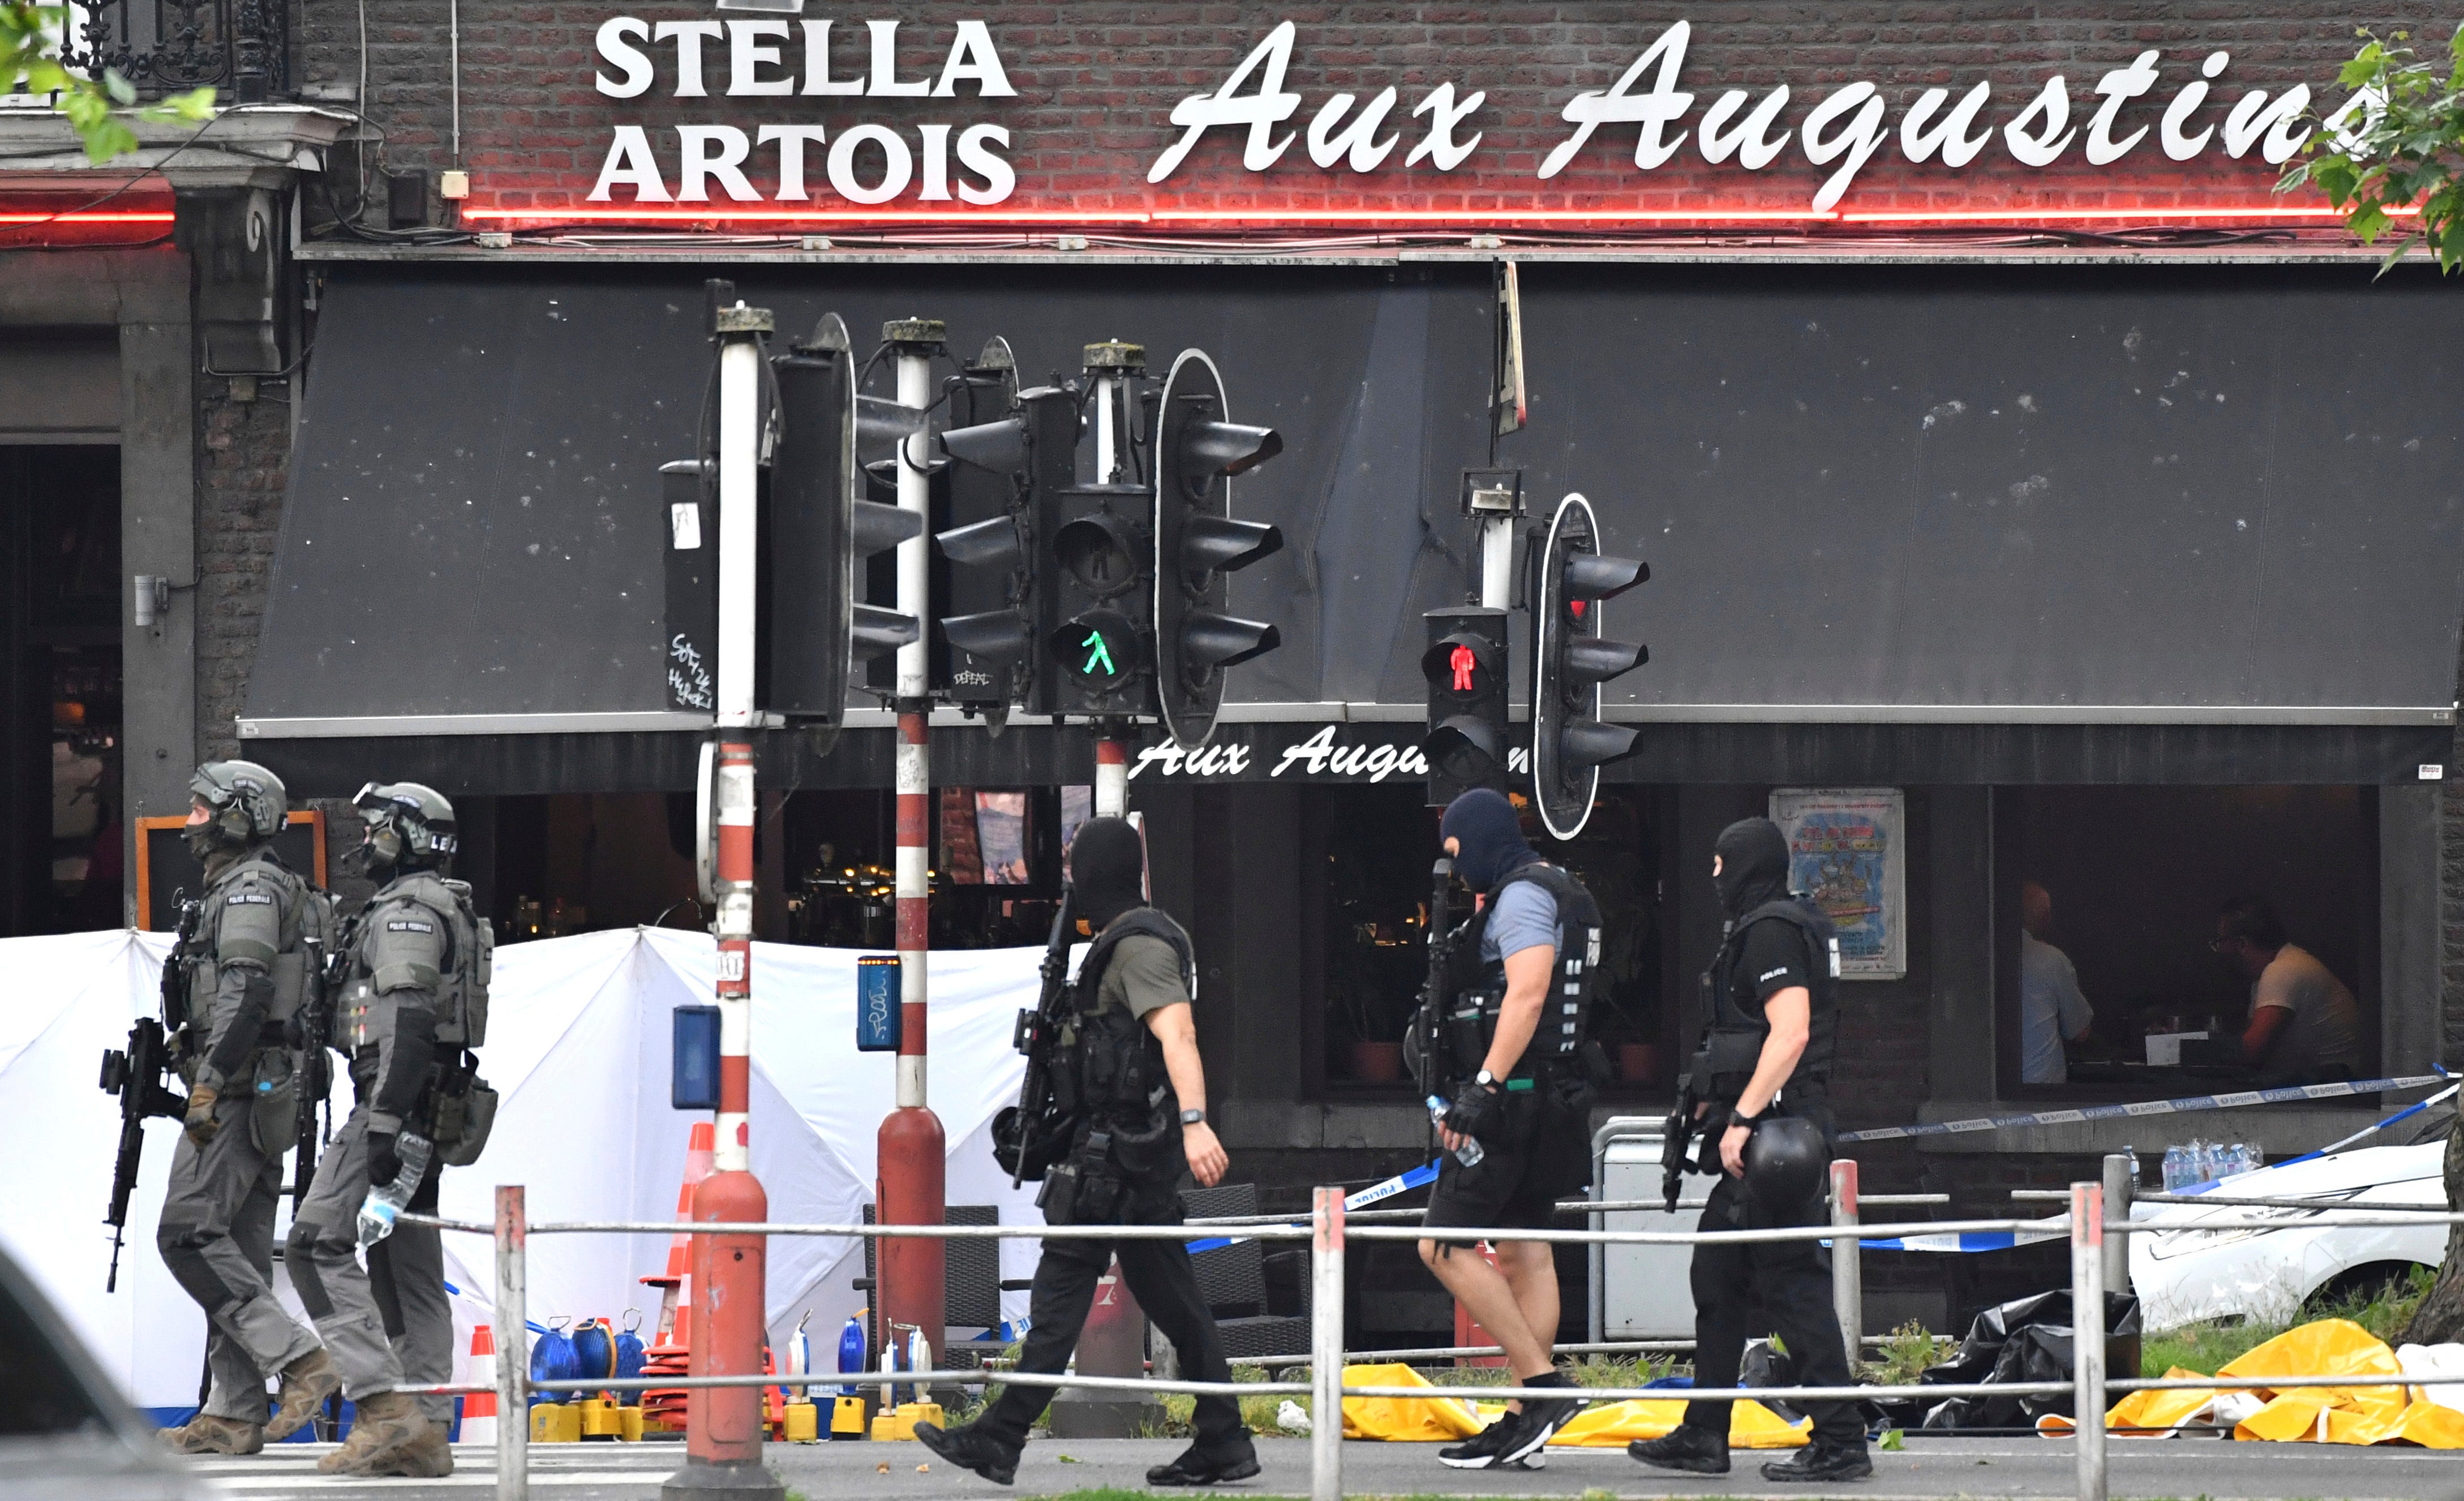 Belgian Special Police walk by the scene of a fatal attack in Liege, Belgium, Tuesday, May 29, 2018. An attacker killed three people, including two police officers, in the Belgian city of Liege on Tuesday, a city official said. Police later killed th